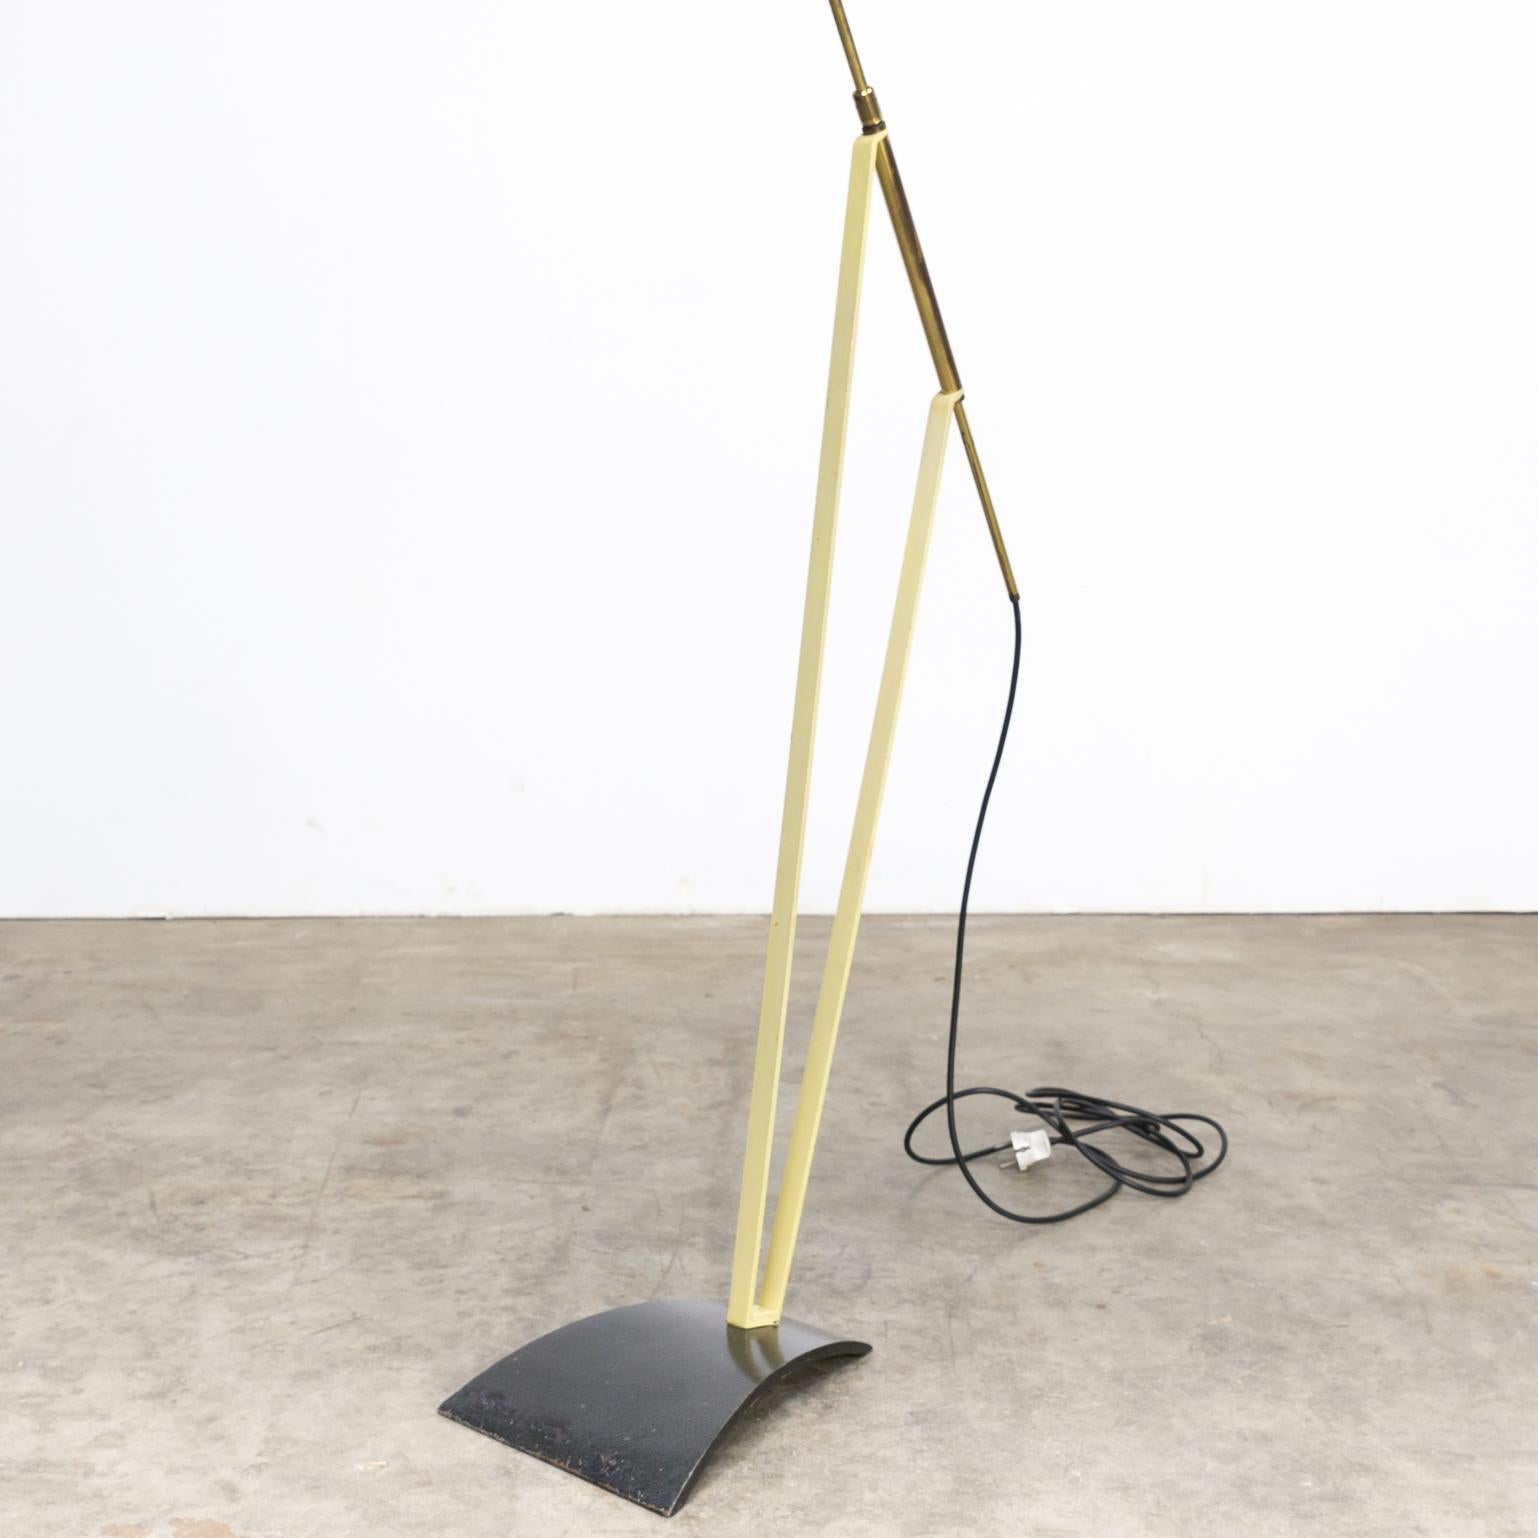 1950s Hans Bergström Floor Lamp with Adjustable Fabric Shade for Ateljé Lyktan For Sale 4